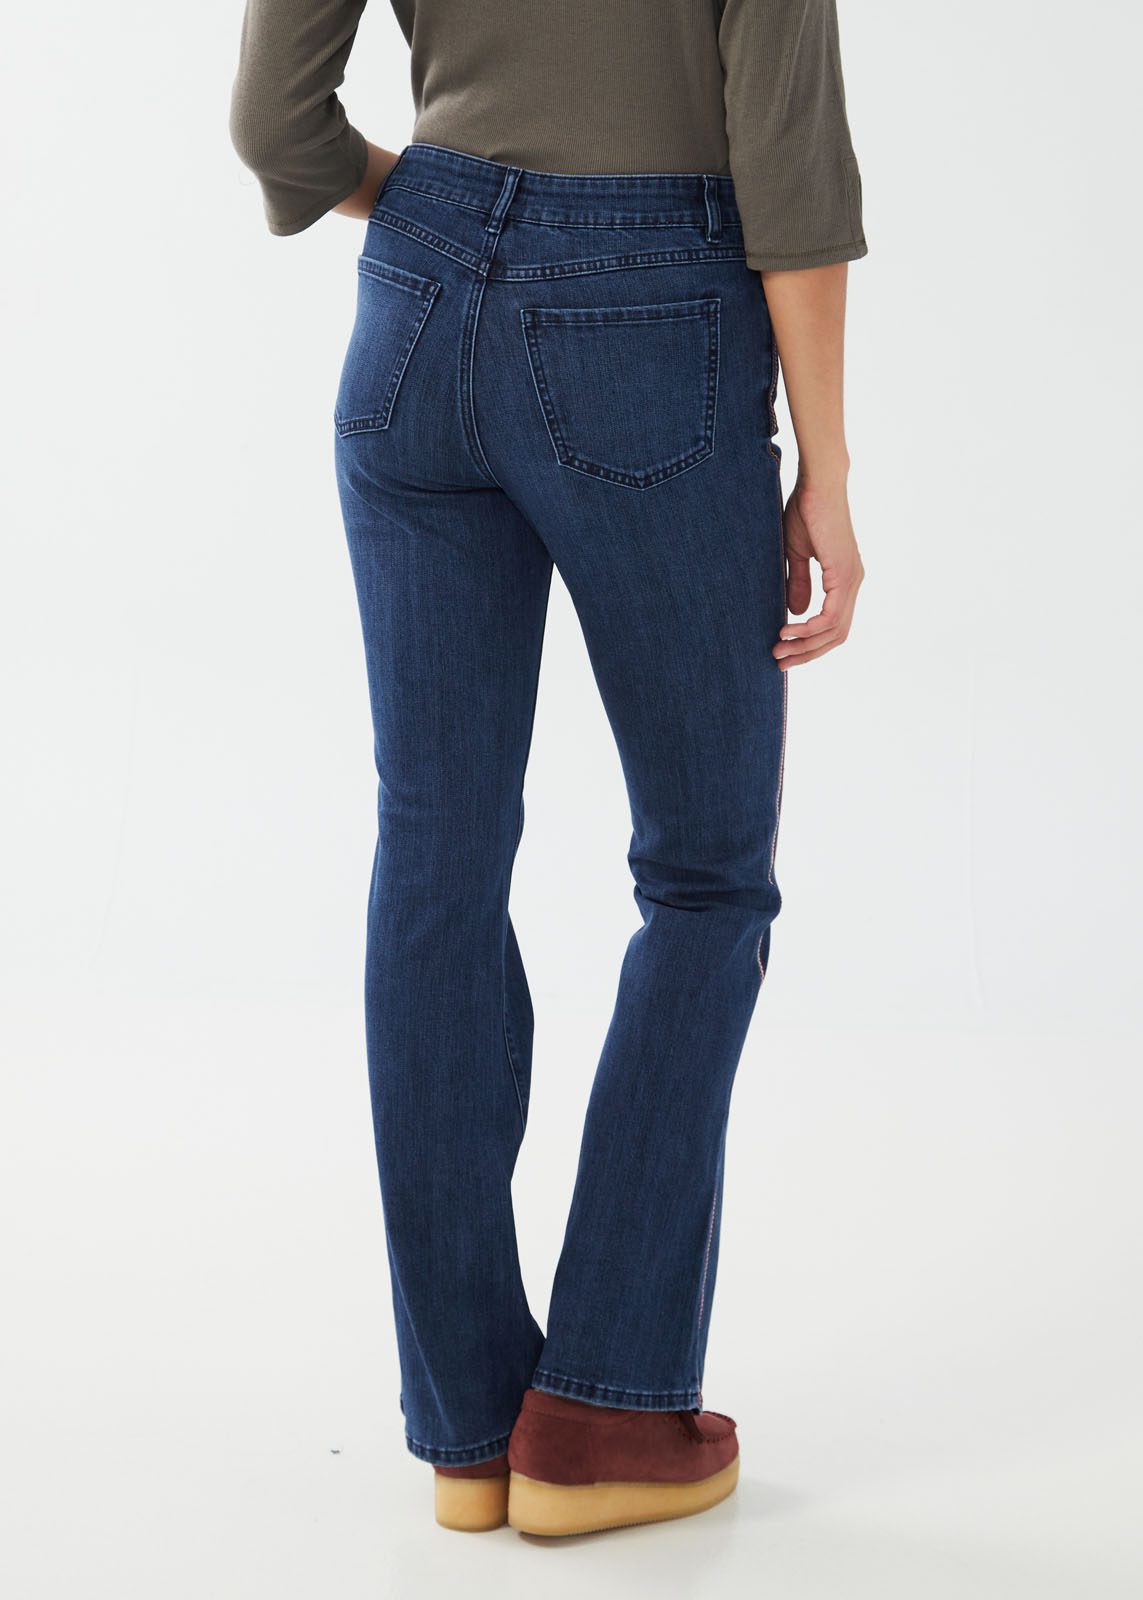 French Dressing Jeans Olivia Flare Leg With Embroidery 